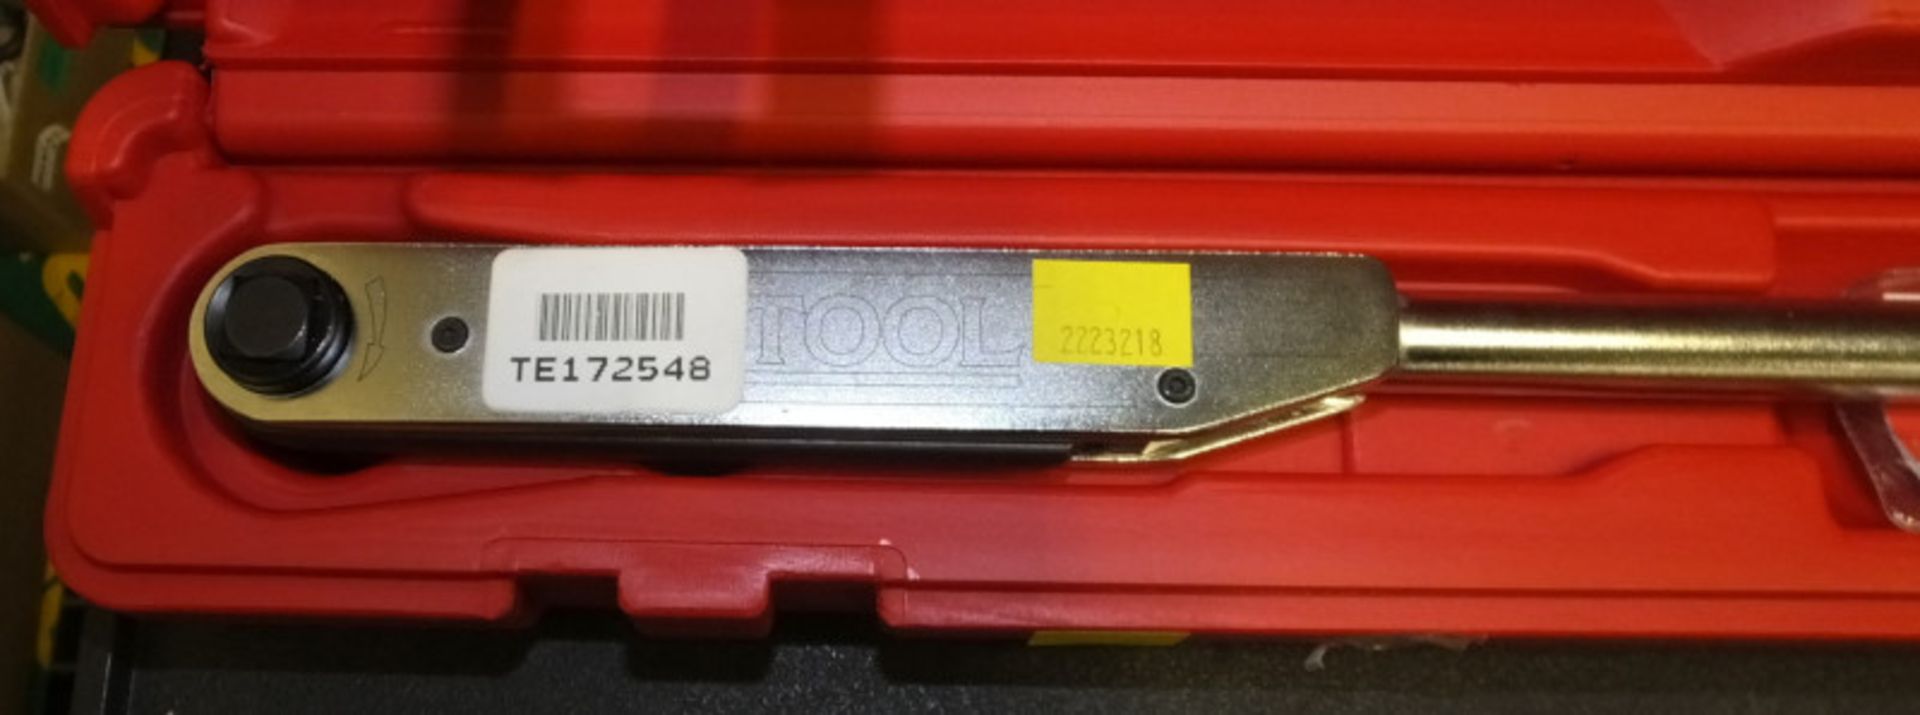 Britool EVT 600A Torque Wrench 12-68Nm with case - Image 2 of 6